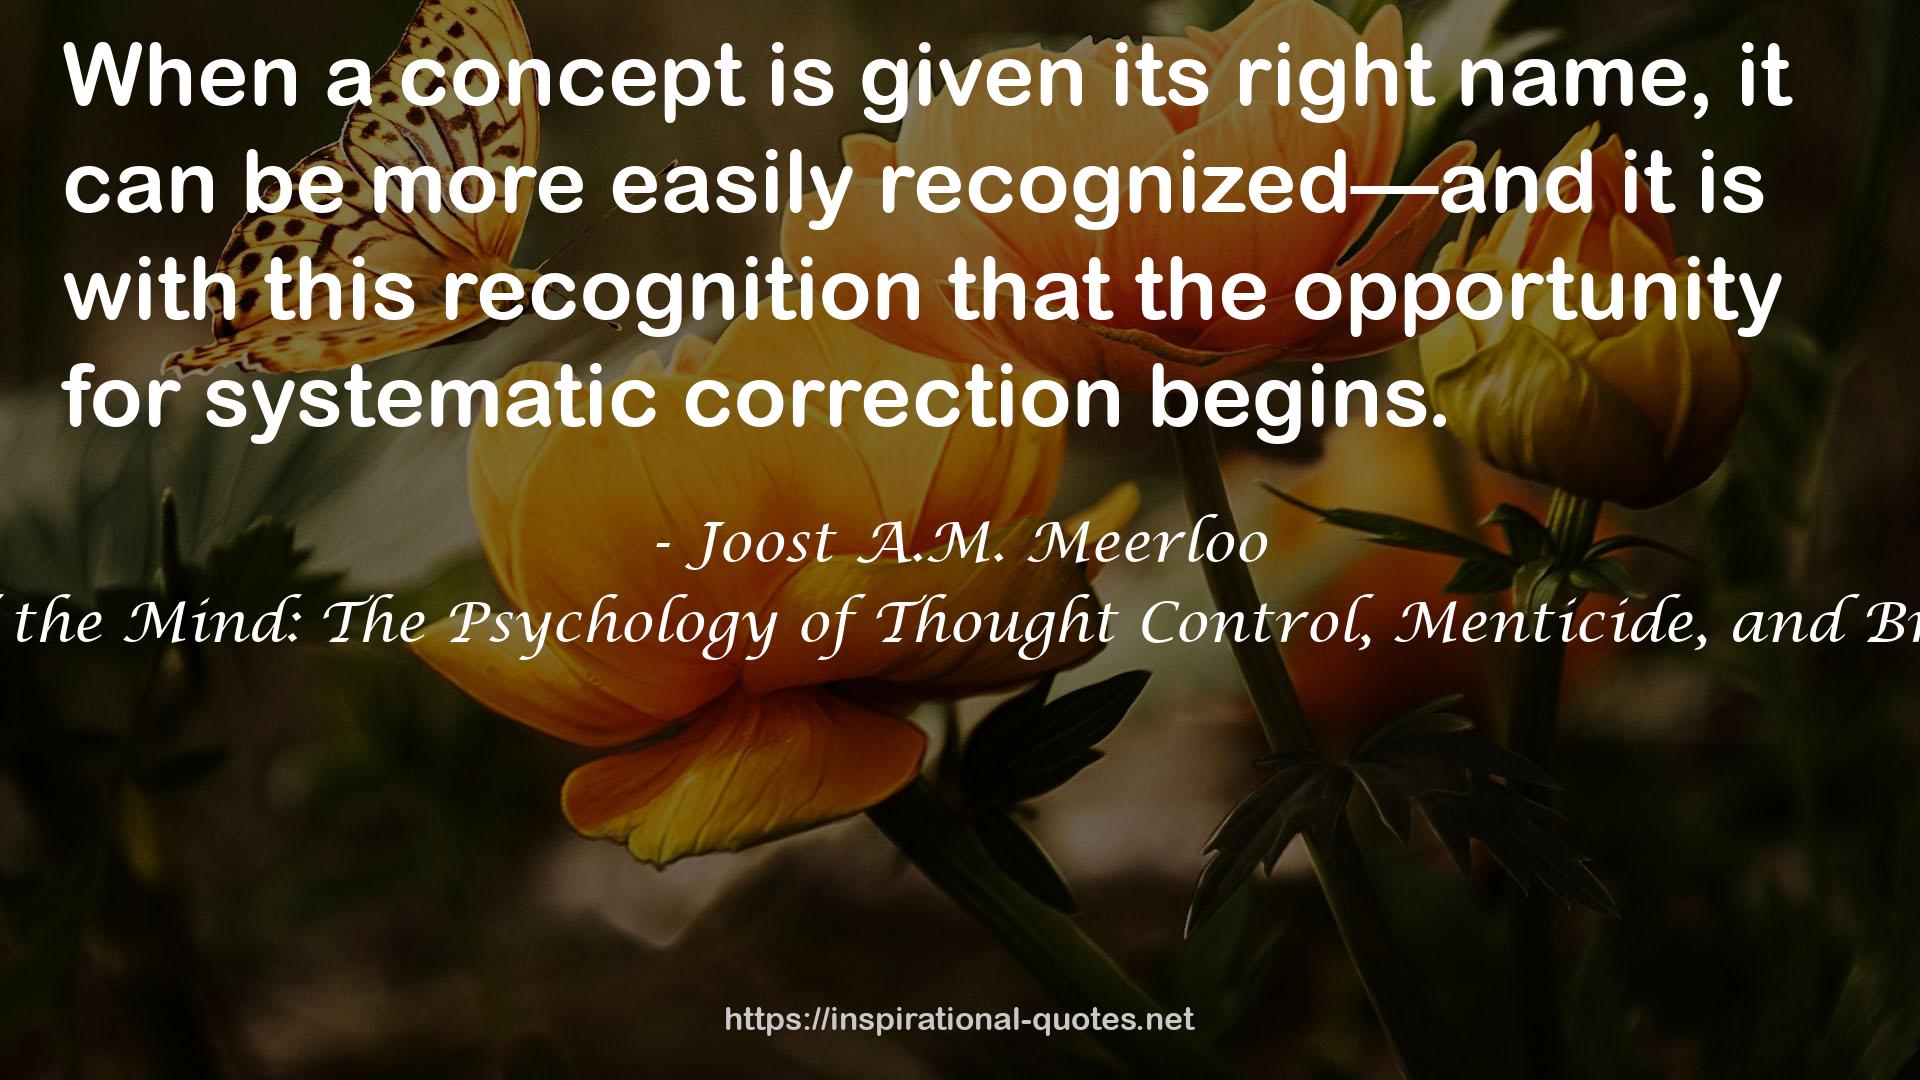 The Rape of the Mind: The Psychology of Thought Control, Menticide, and Brainwashing QUOTES